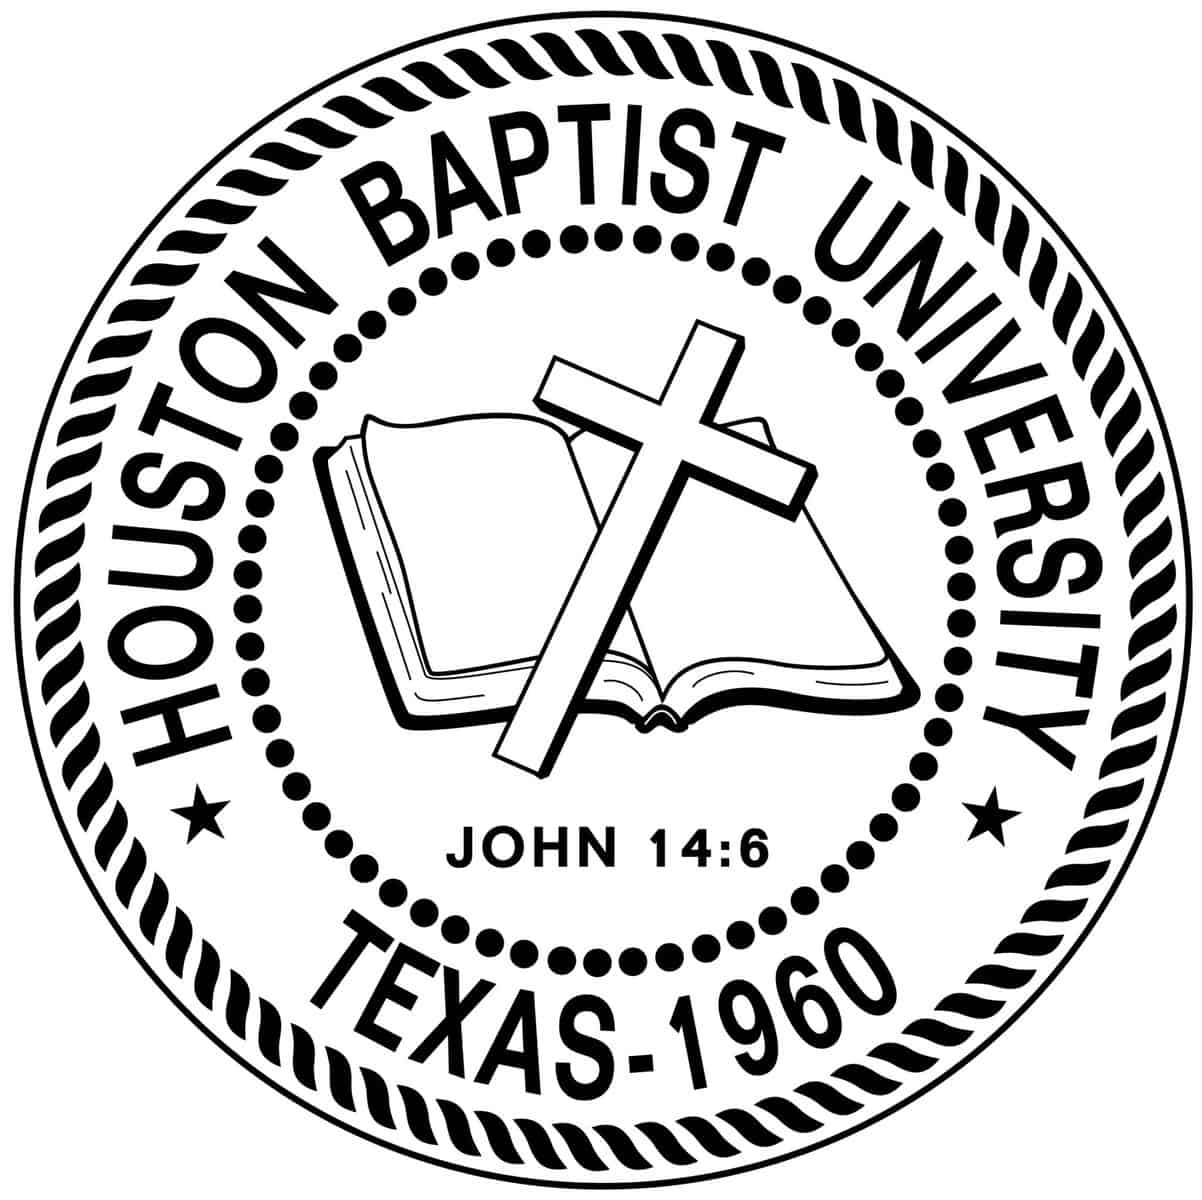 Houston Baptist University crest with rope design encircling an open bible with a cross laying on a bible